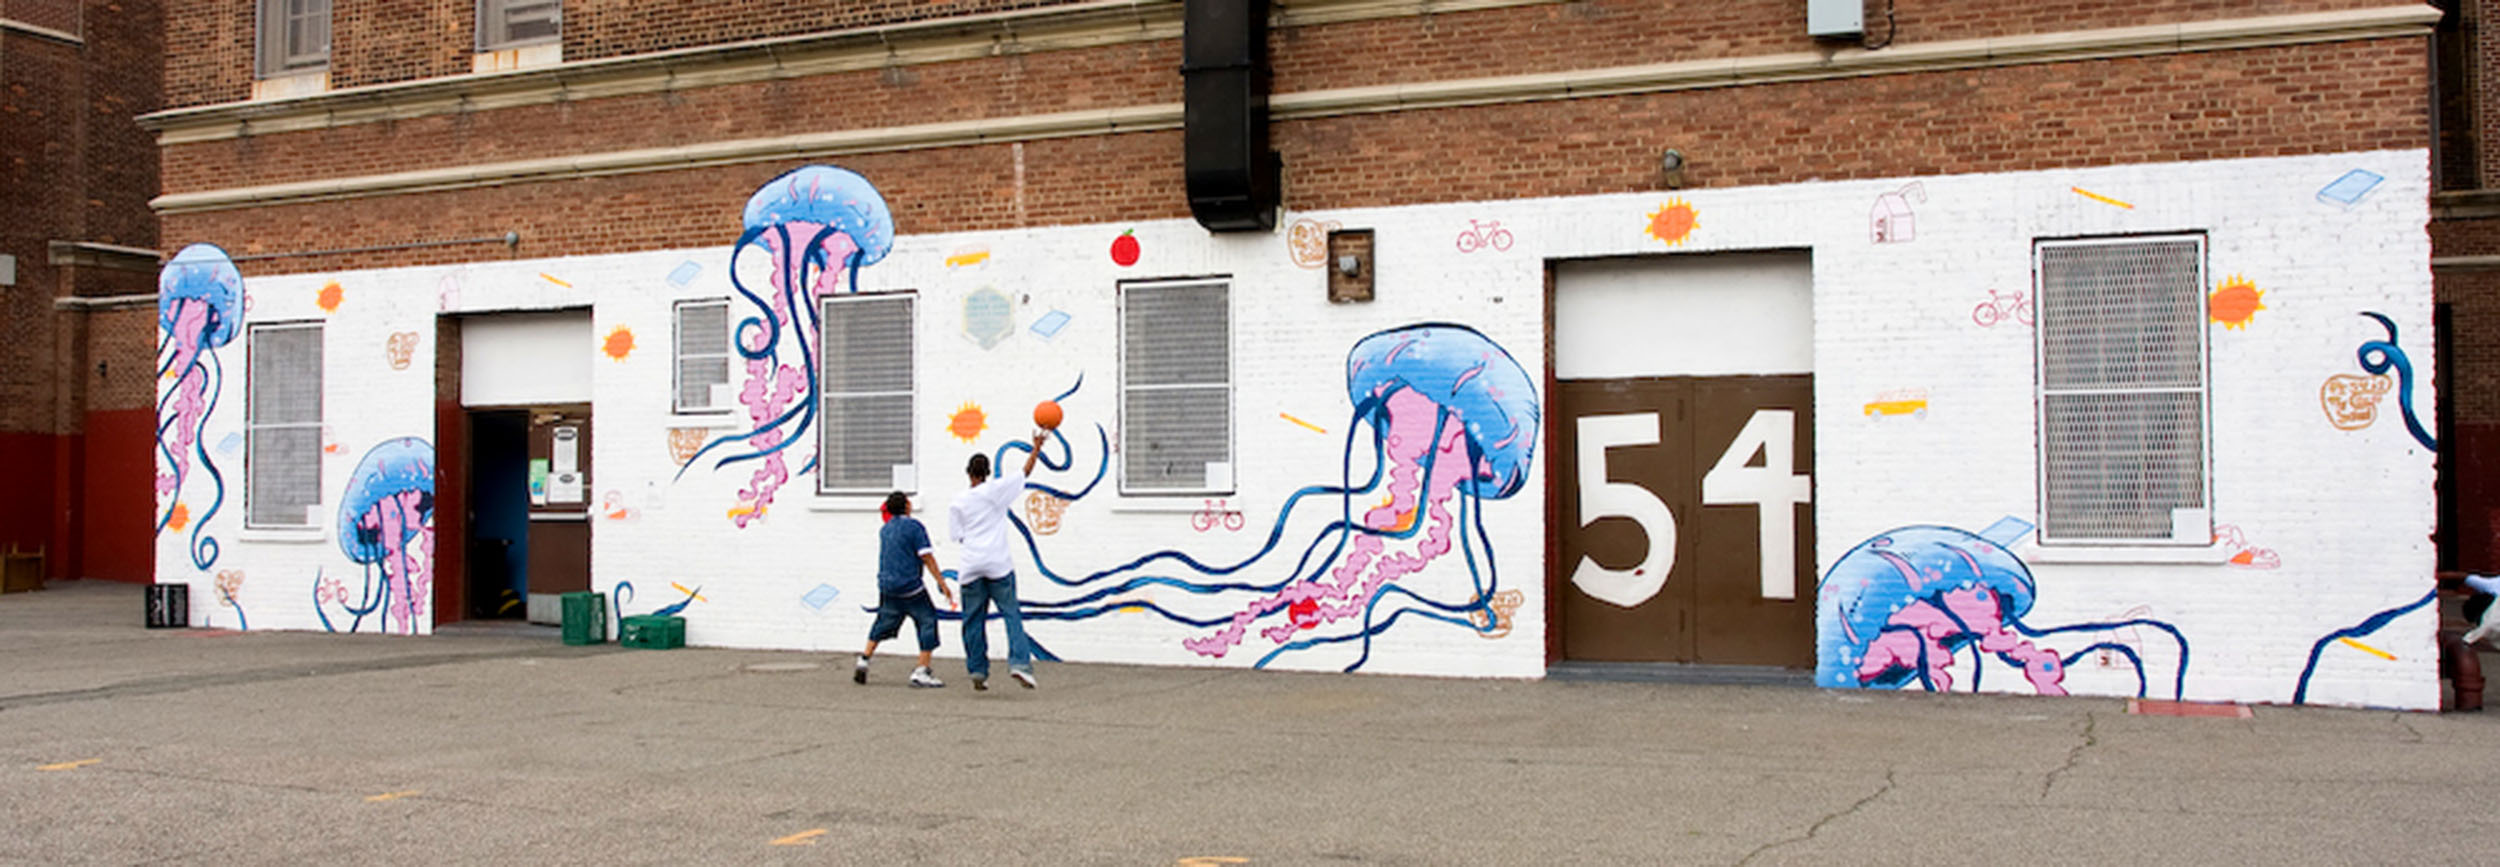 Mural on the side of a school depicting several jellyfish on a white backdrop with bicycles, books, and germs.